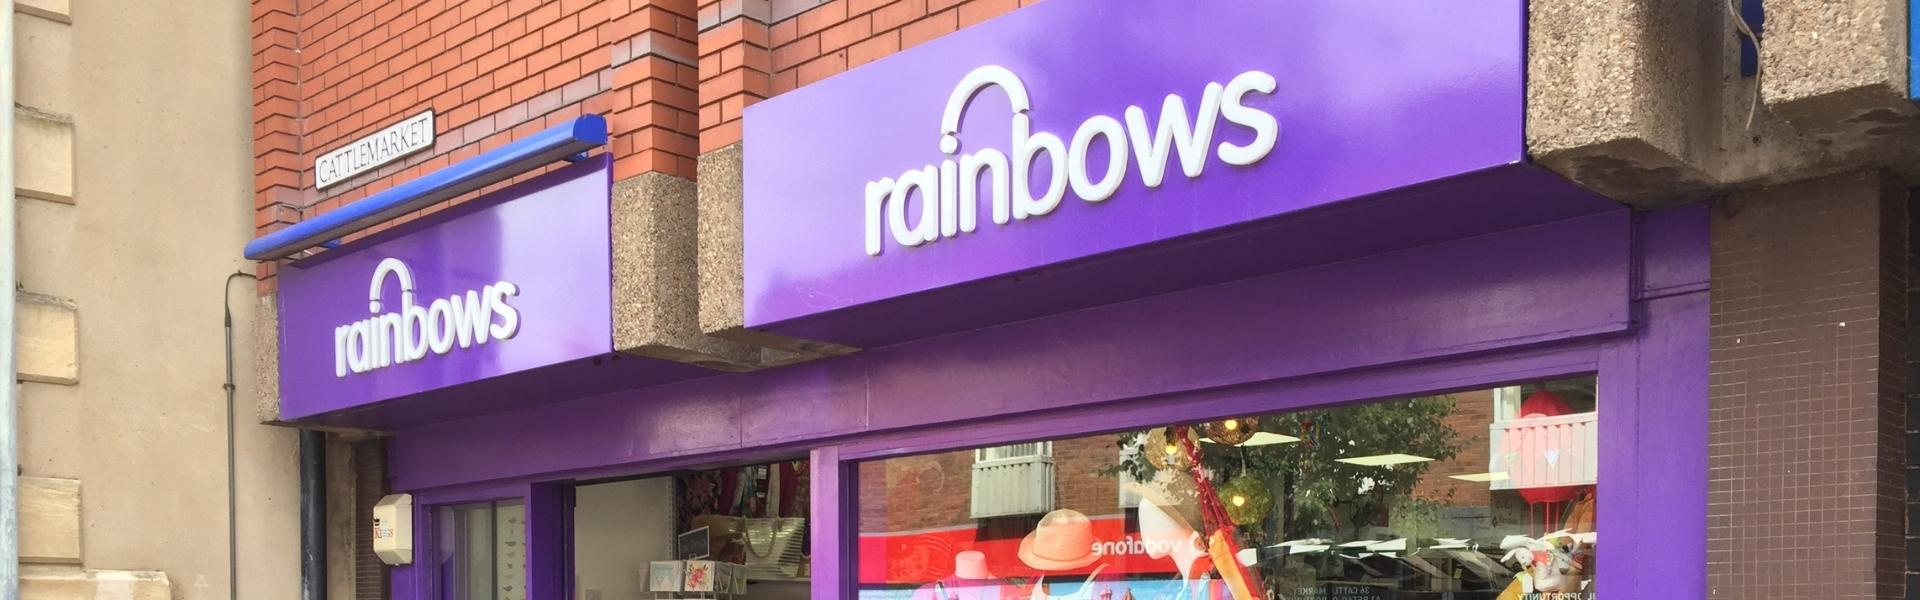 Outside the Rainbows shop in Loughborough